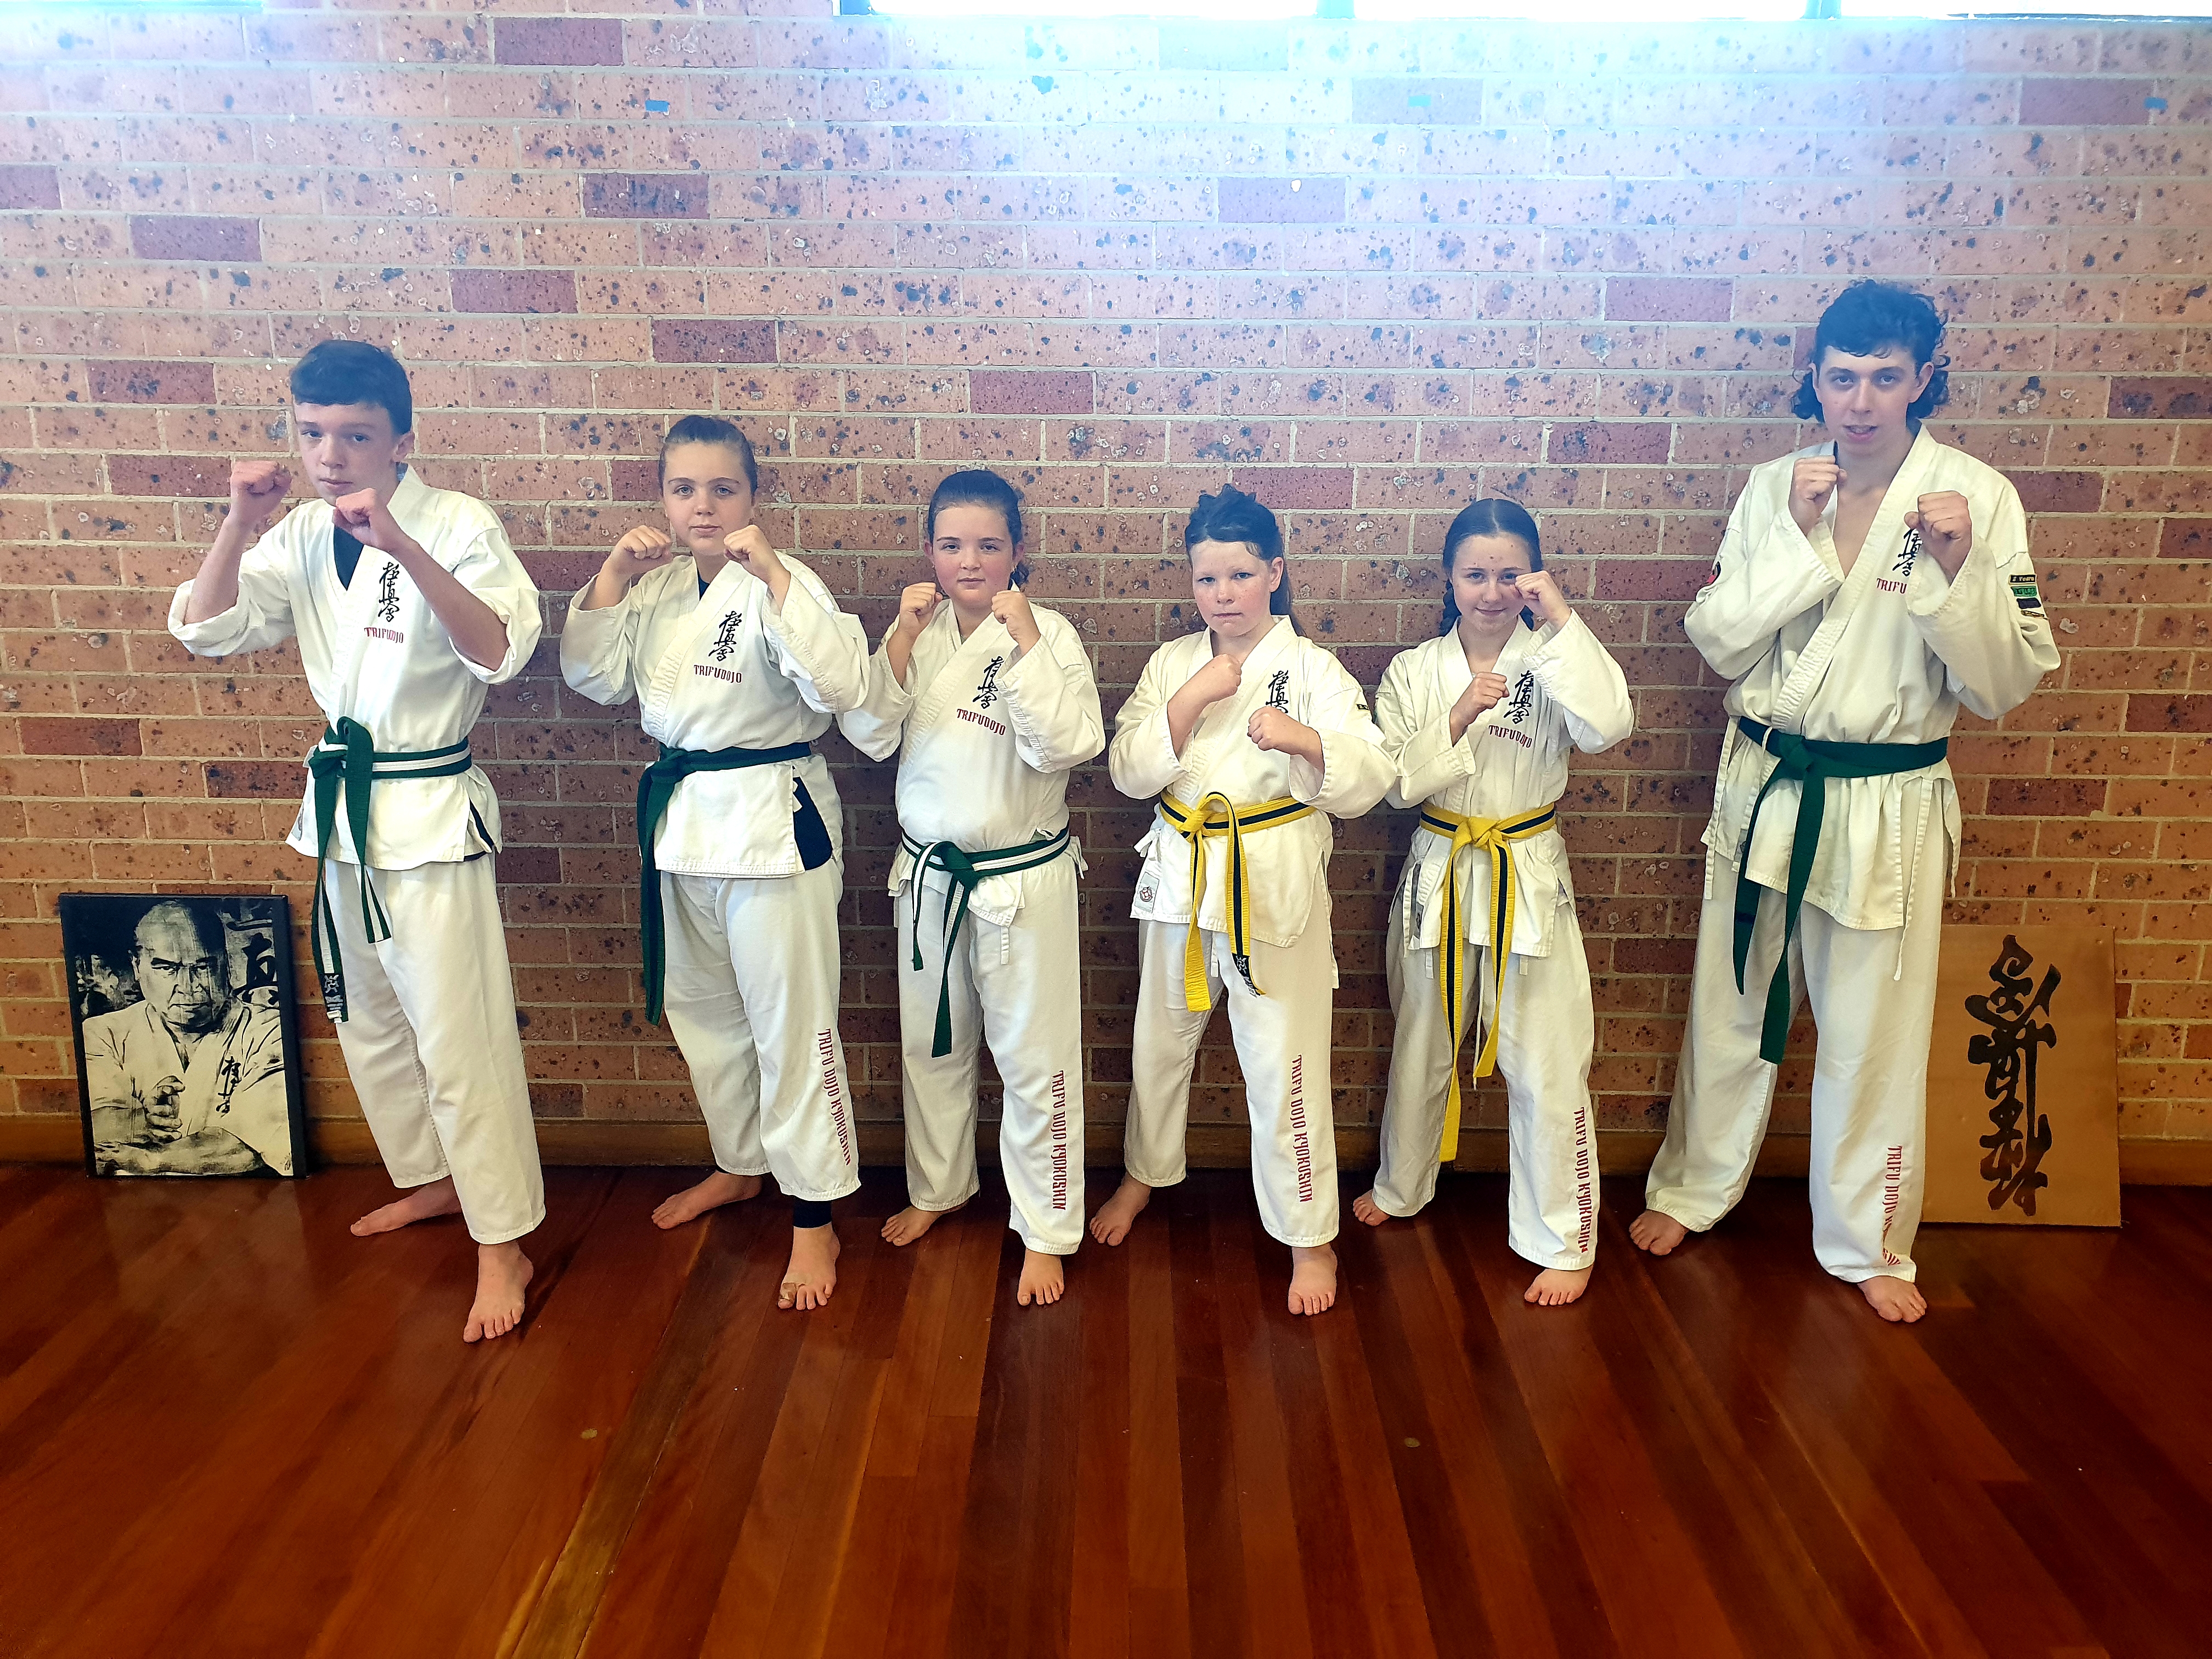 Congratulations to those who achieved higher Kyokushin Karate belts after their 3 hour grading at Tahmoor Wollondilly